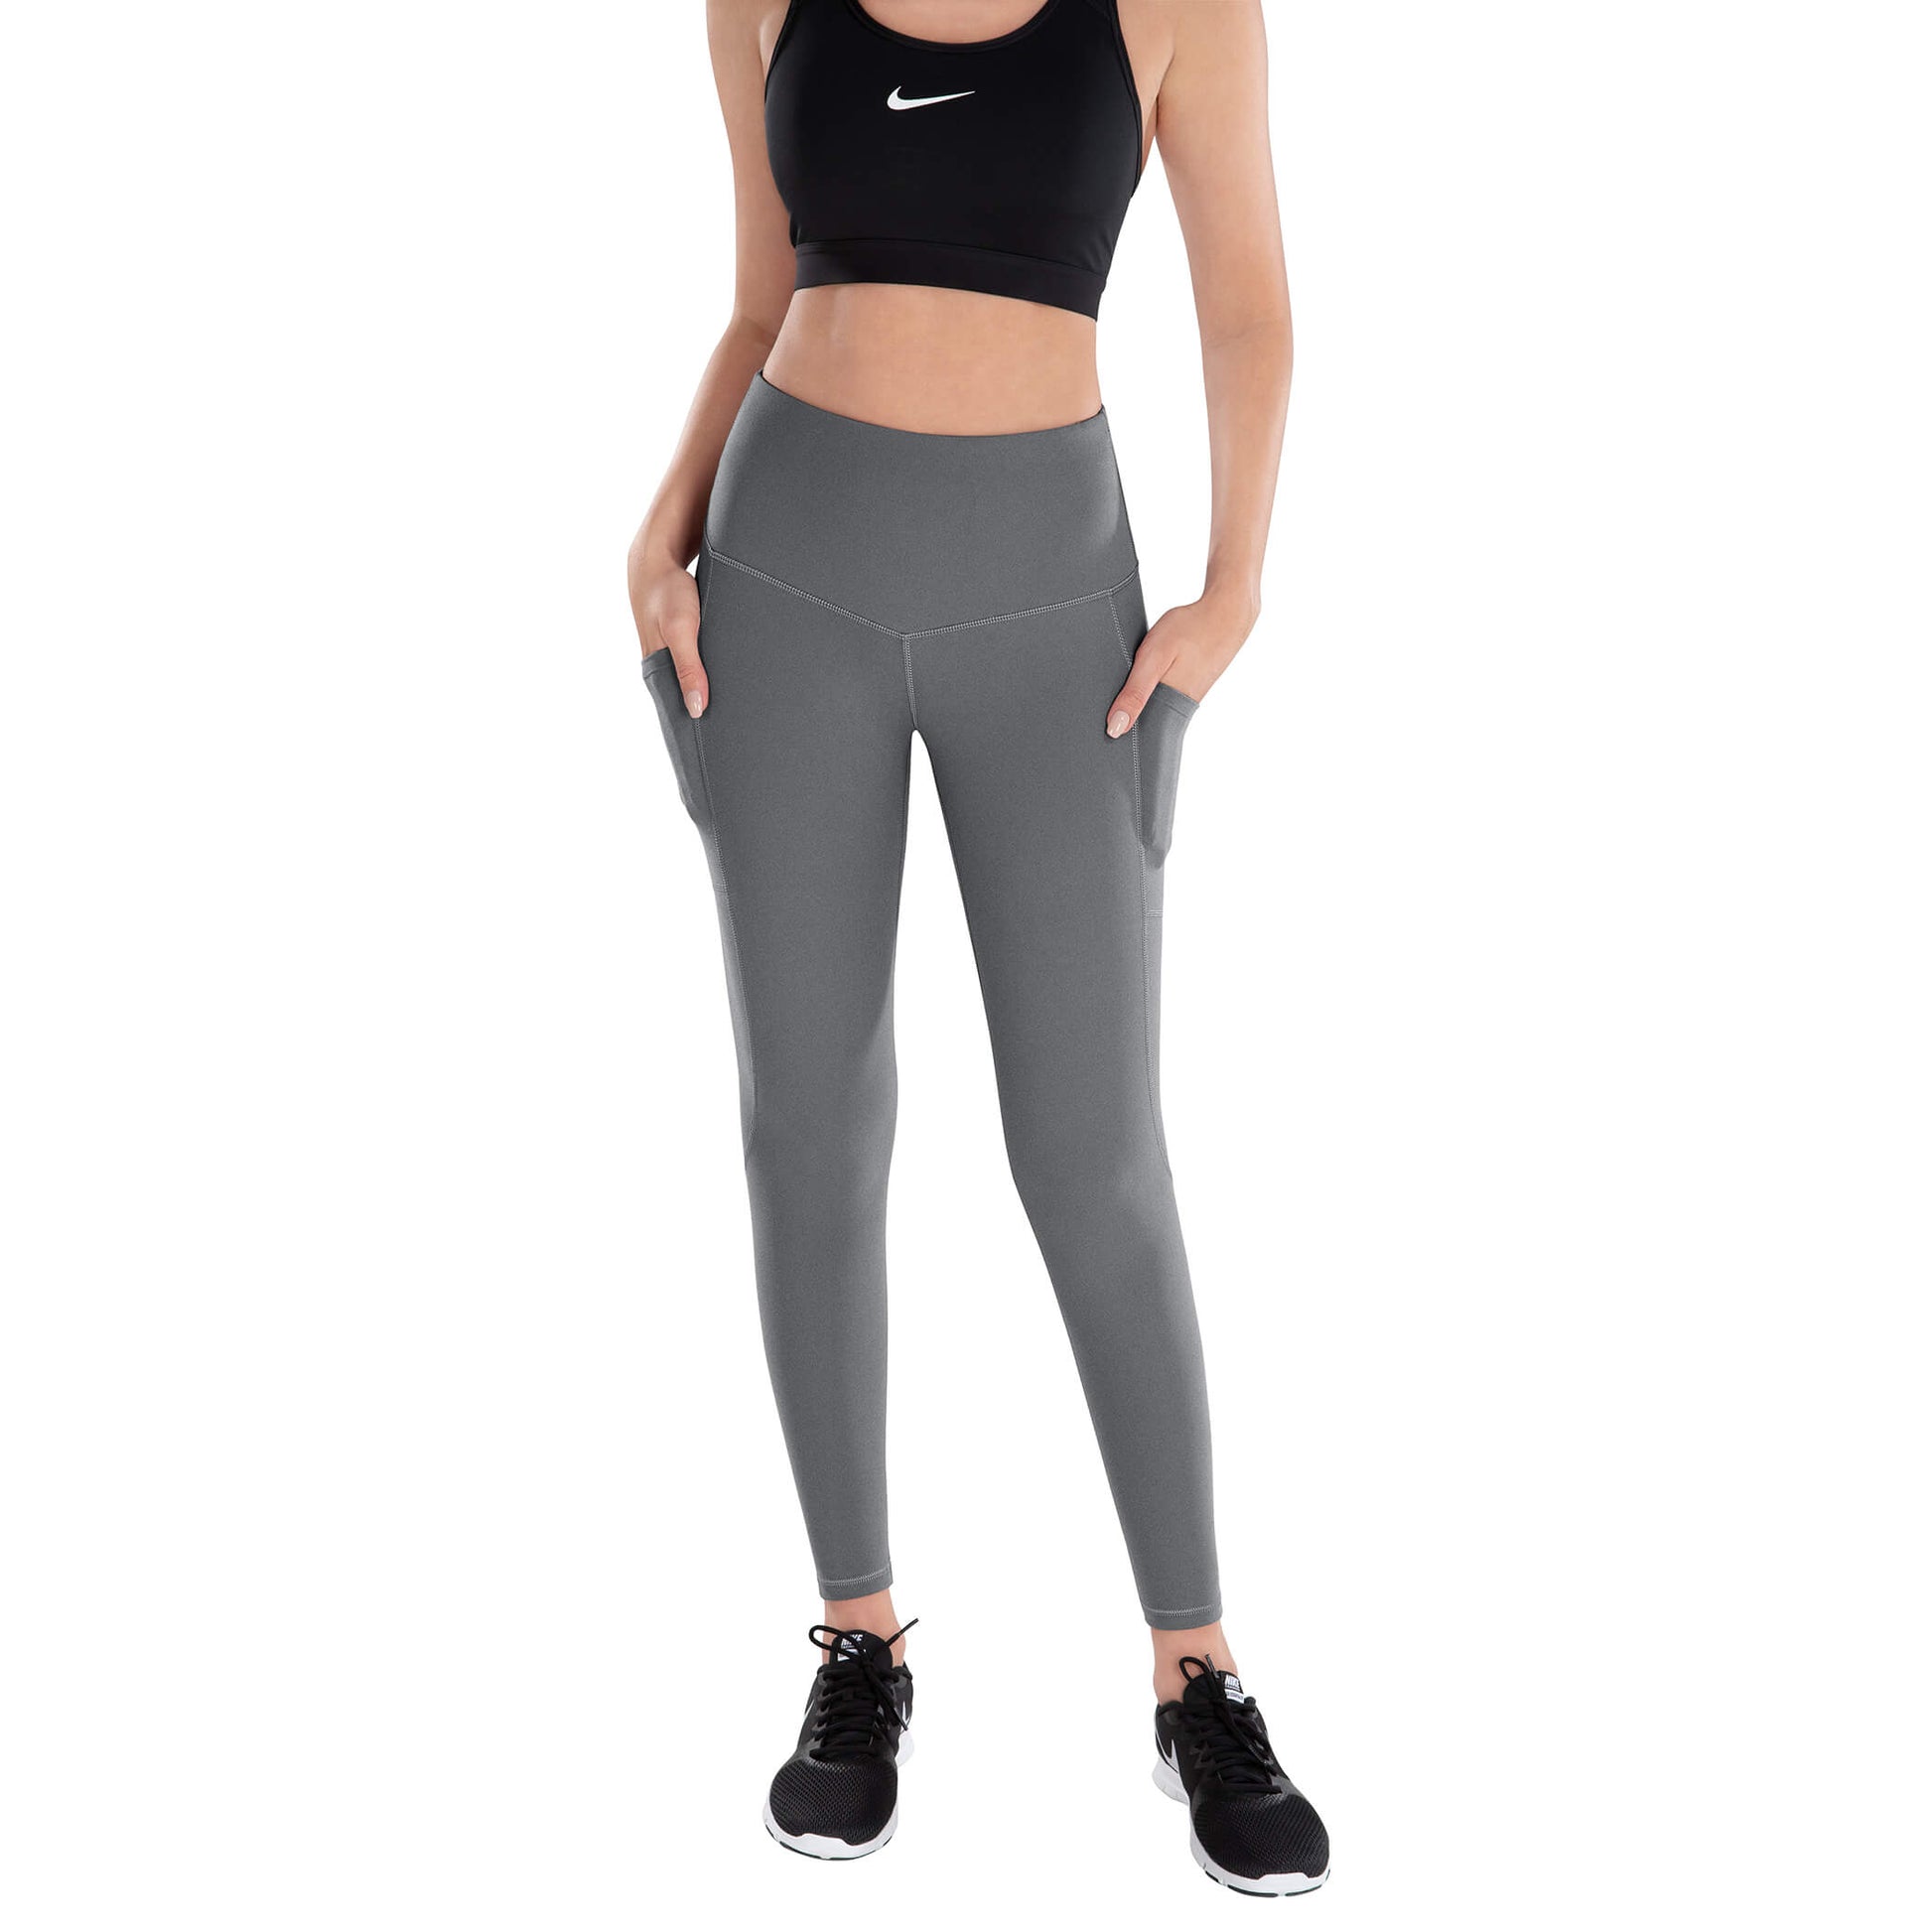 leggings for women with pockets : High Waist Yoga Pants with